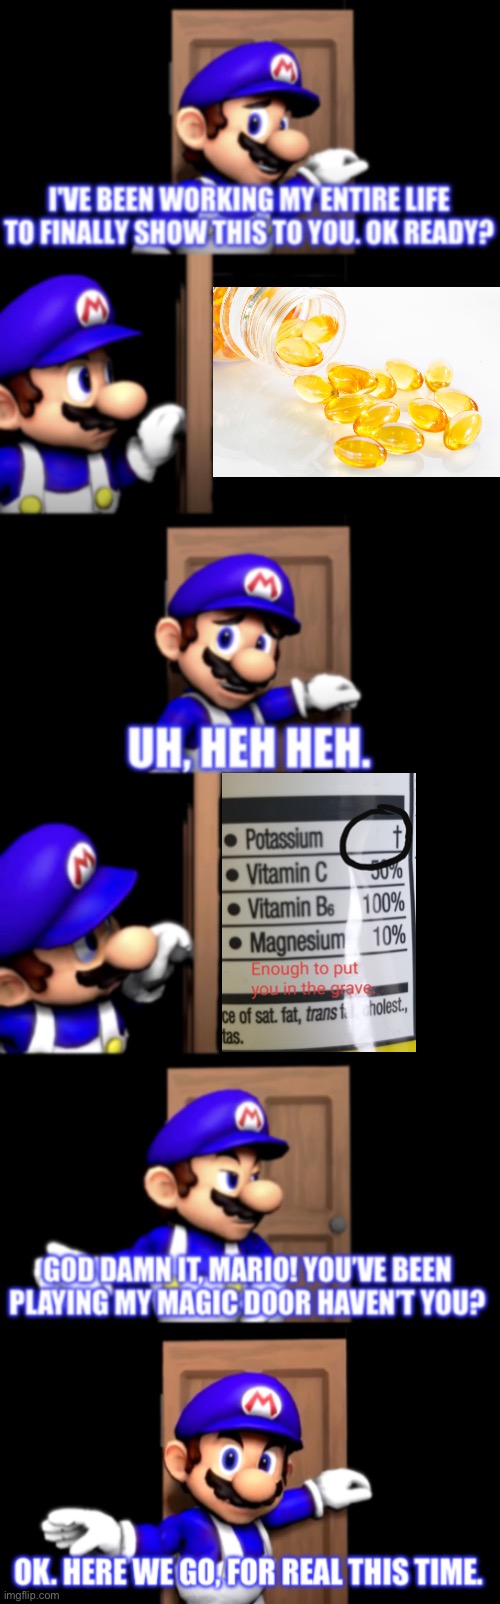 SMG4 door full version | image tagged in smg4 door full version,health,memes,funny | made w/ Imgflip meme maker